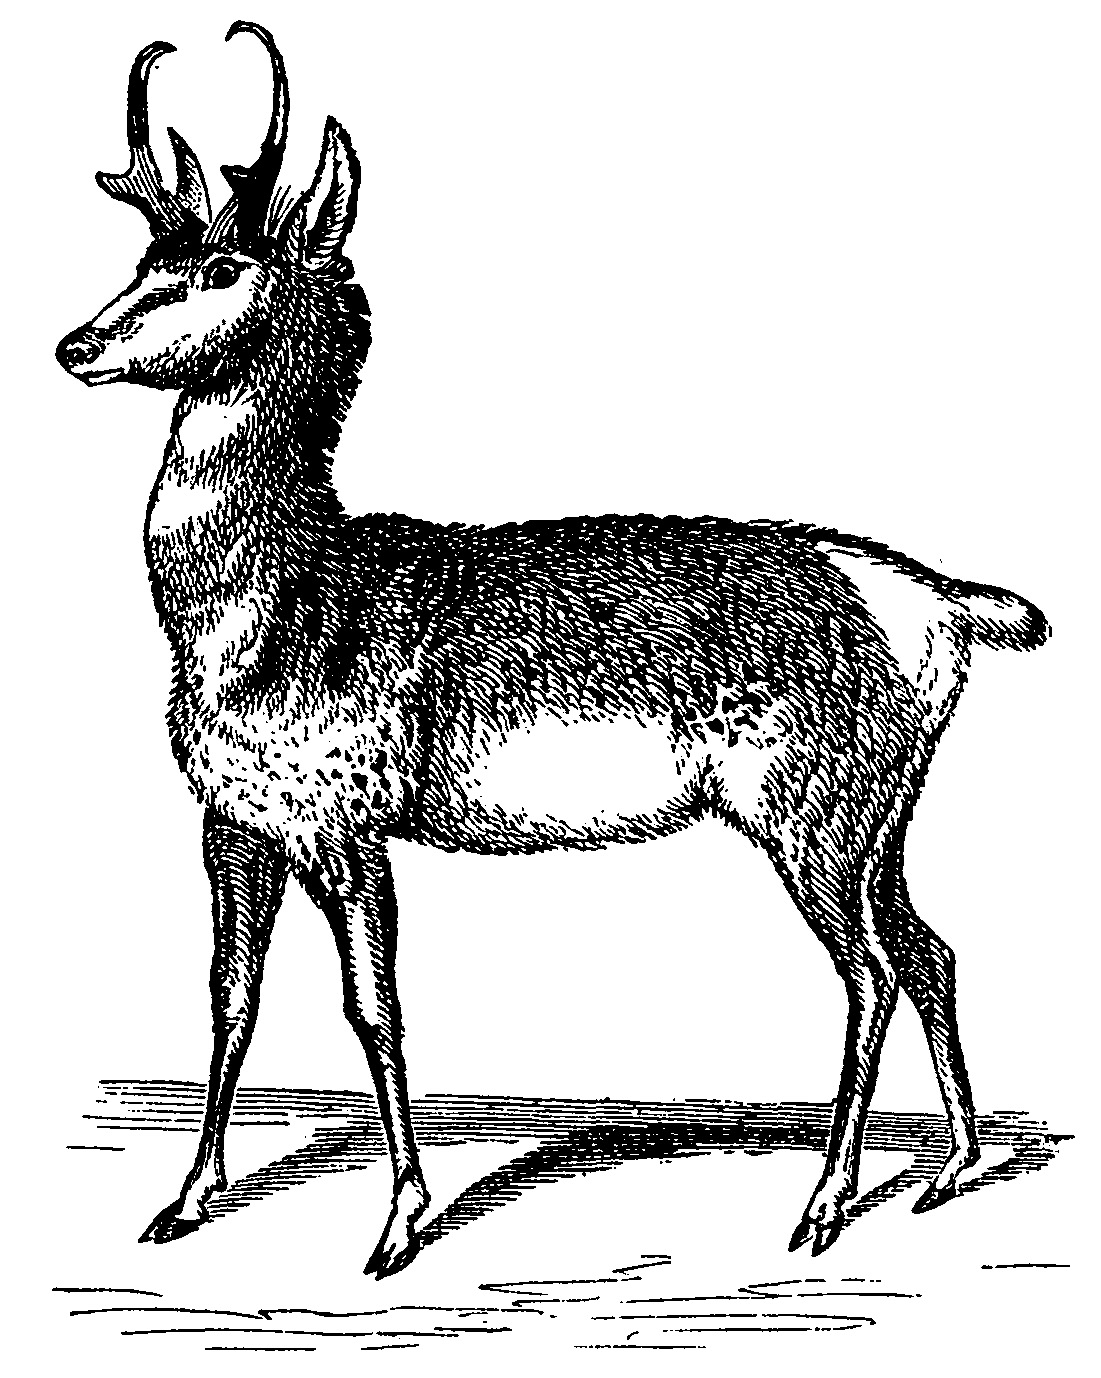 "The Prong-Horn Antelope. From Tenney's Zoology." Reprinted in the <i>Naturalist </i> in May 1868 in "The Prong-Horn Antelope" by W. J. Hays.